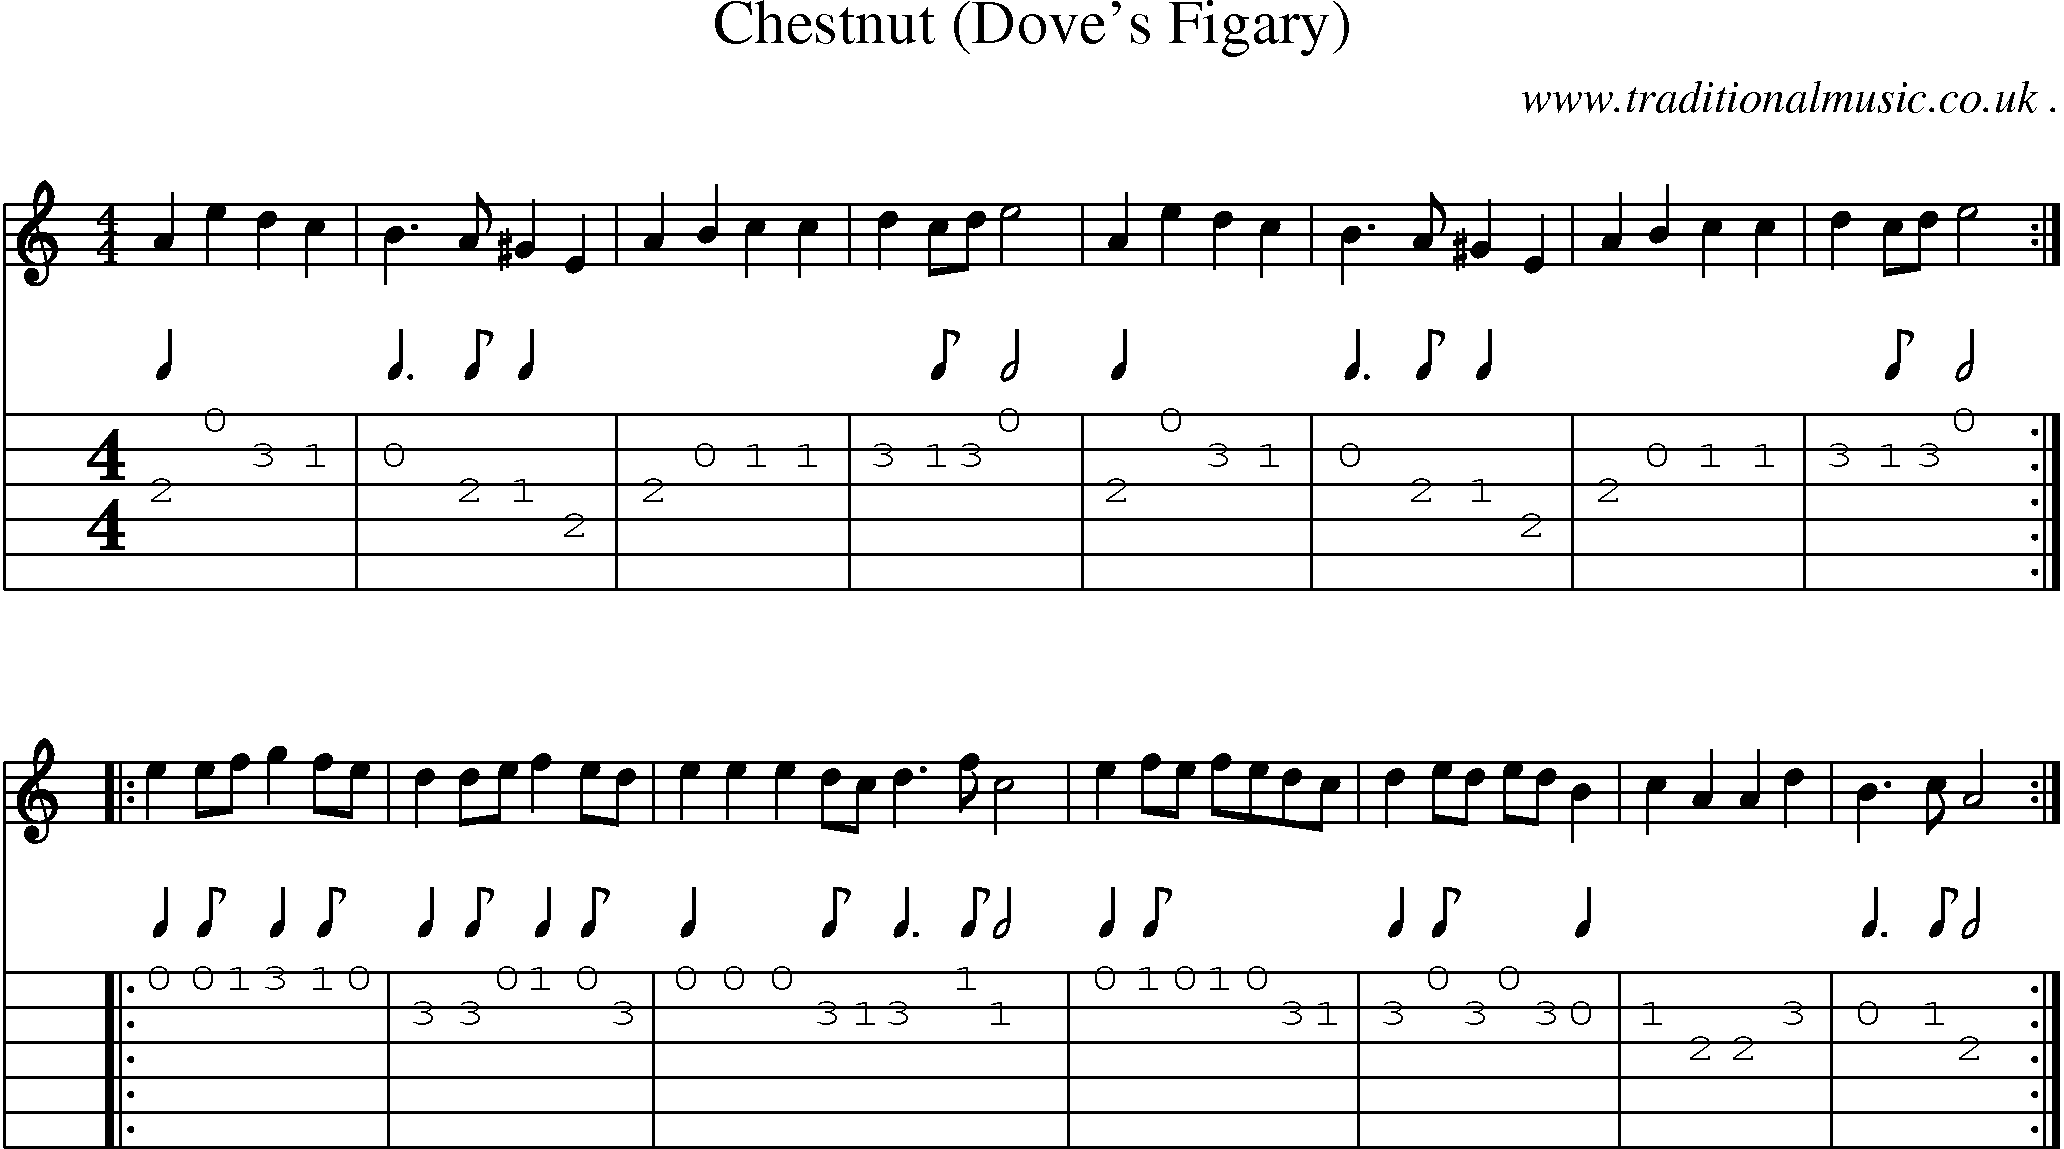 Sheet-Music and Guitar Tabs for Chestnut (doves Figary)